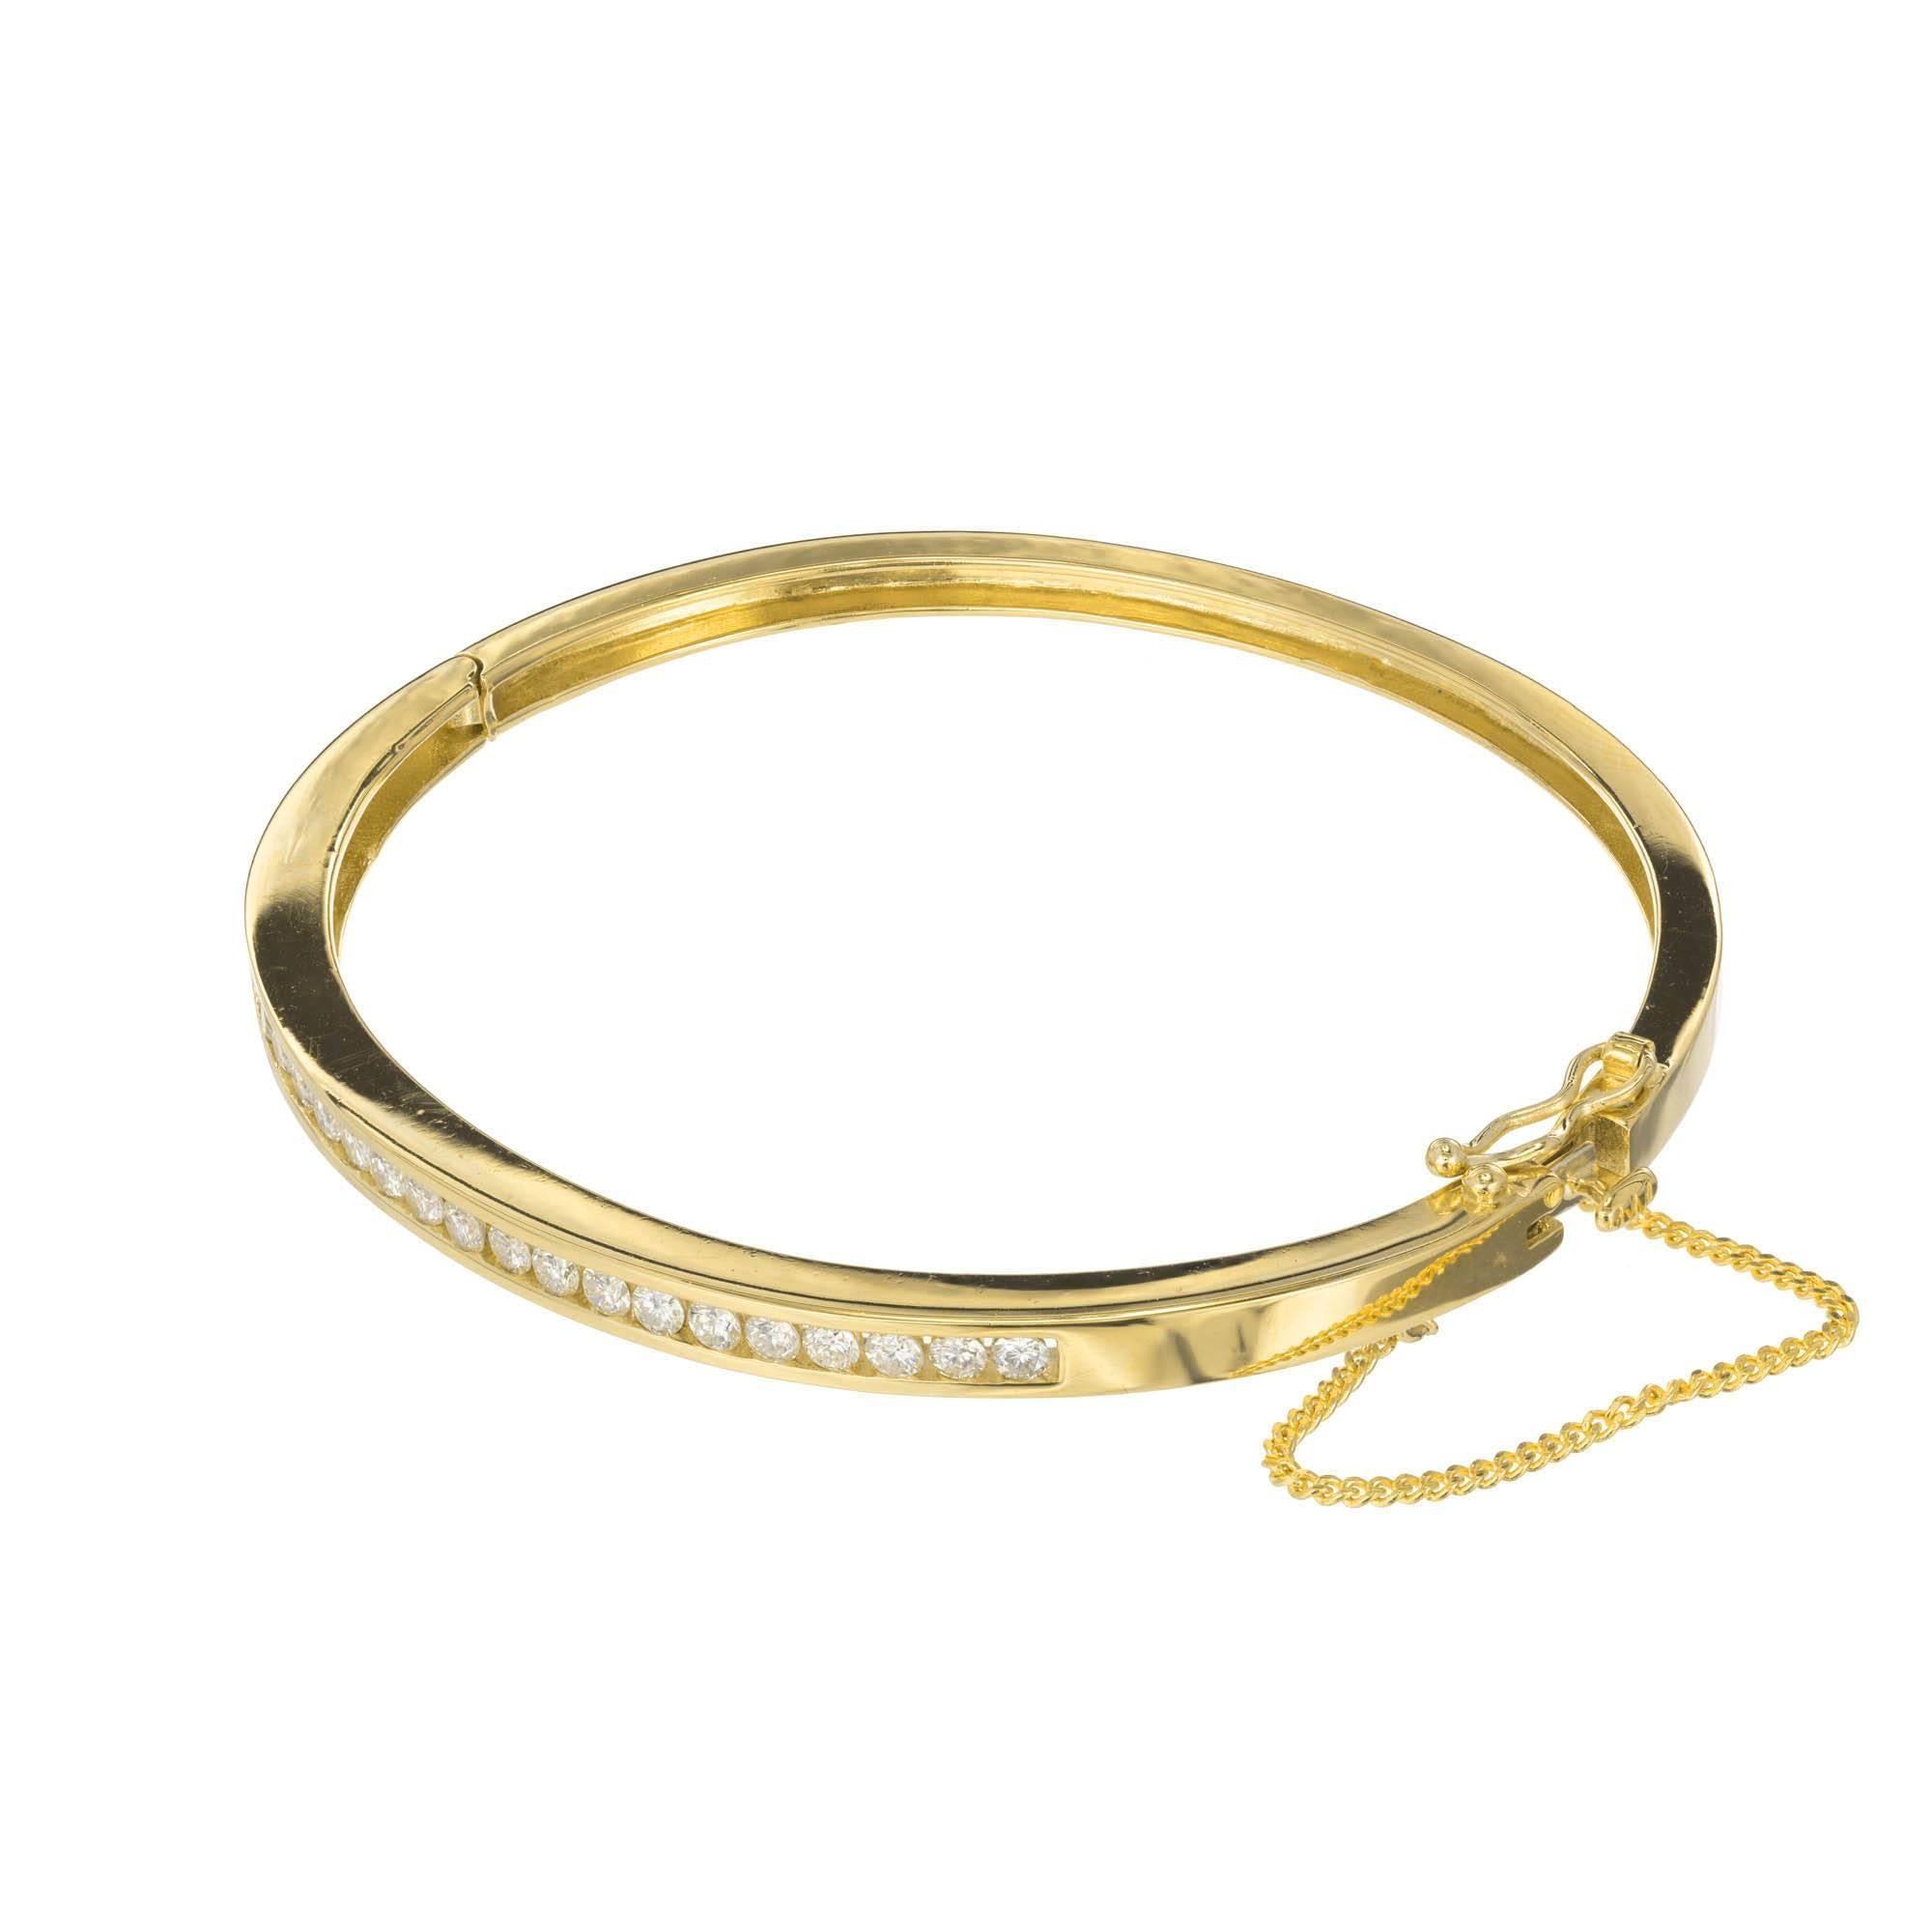 14k yellow gold diamond bangle bracelet. 19 round brilliant cut diamonds are channel set across the top half of the bangle. A safety chain is also attached at lock.

19 round G-H I diamonds 2.1-2.35mm Approximate .76 carats
14k yellow gold
Tested: